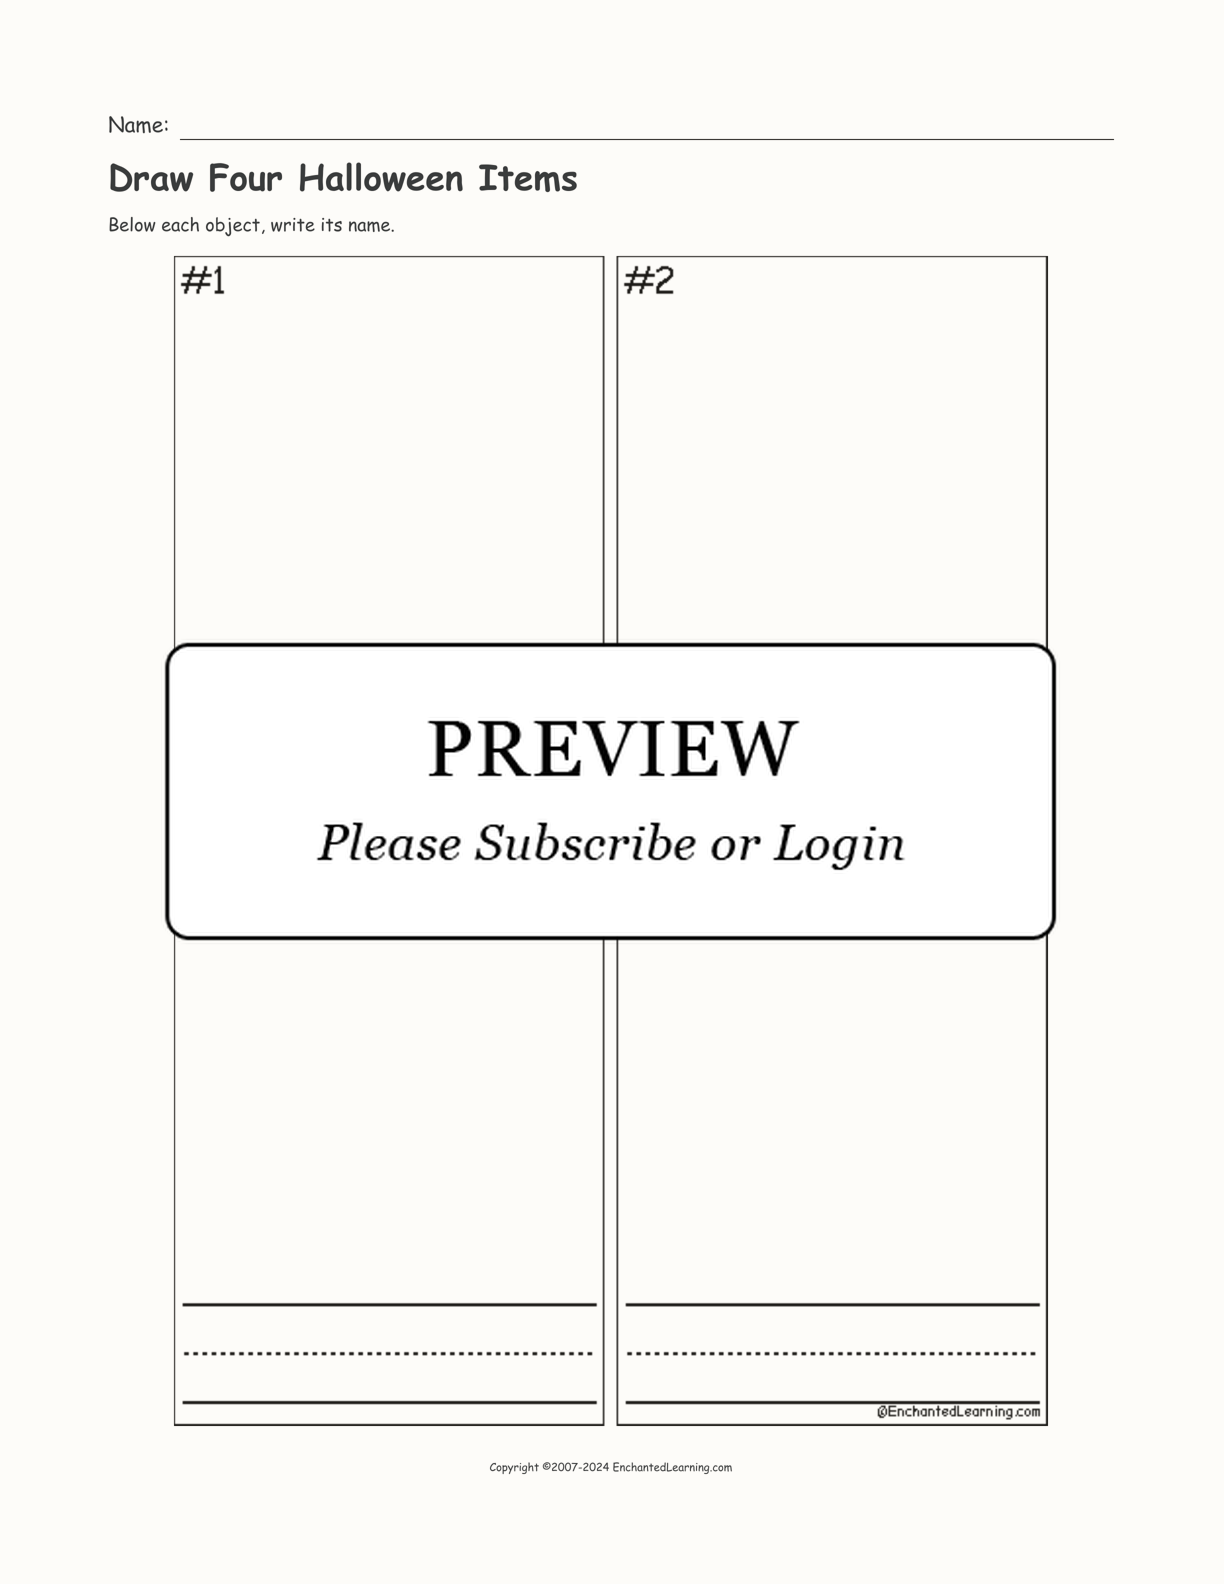 Draw Four Halloween Items interactive printout page 1